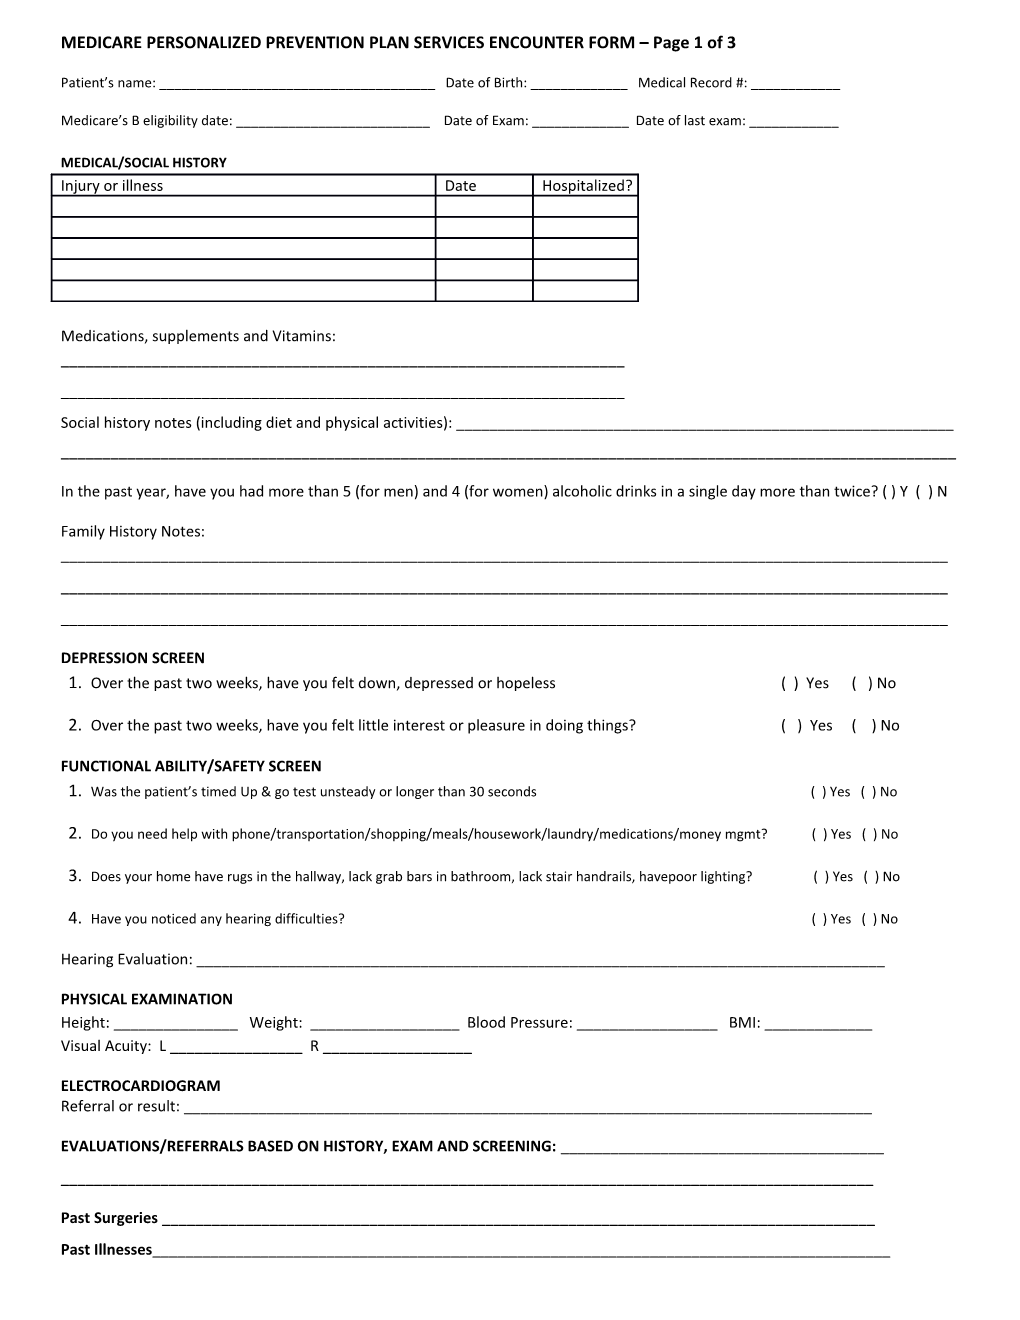 MEDICARE PERSONALIZED PREVENTION PLAN SERVICES ENCOUNTER FORM Page 1 of 3